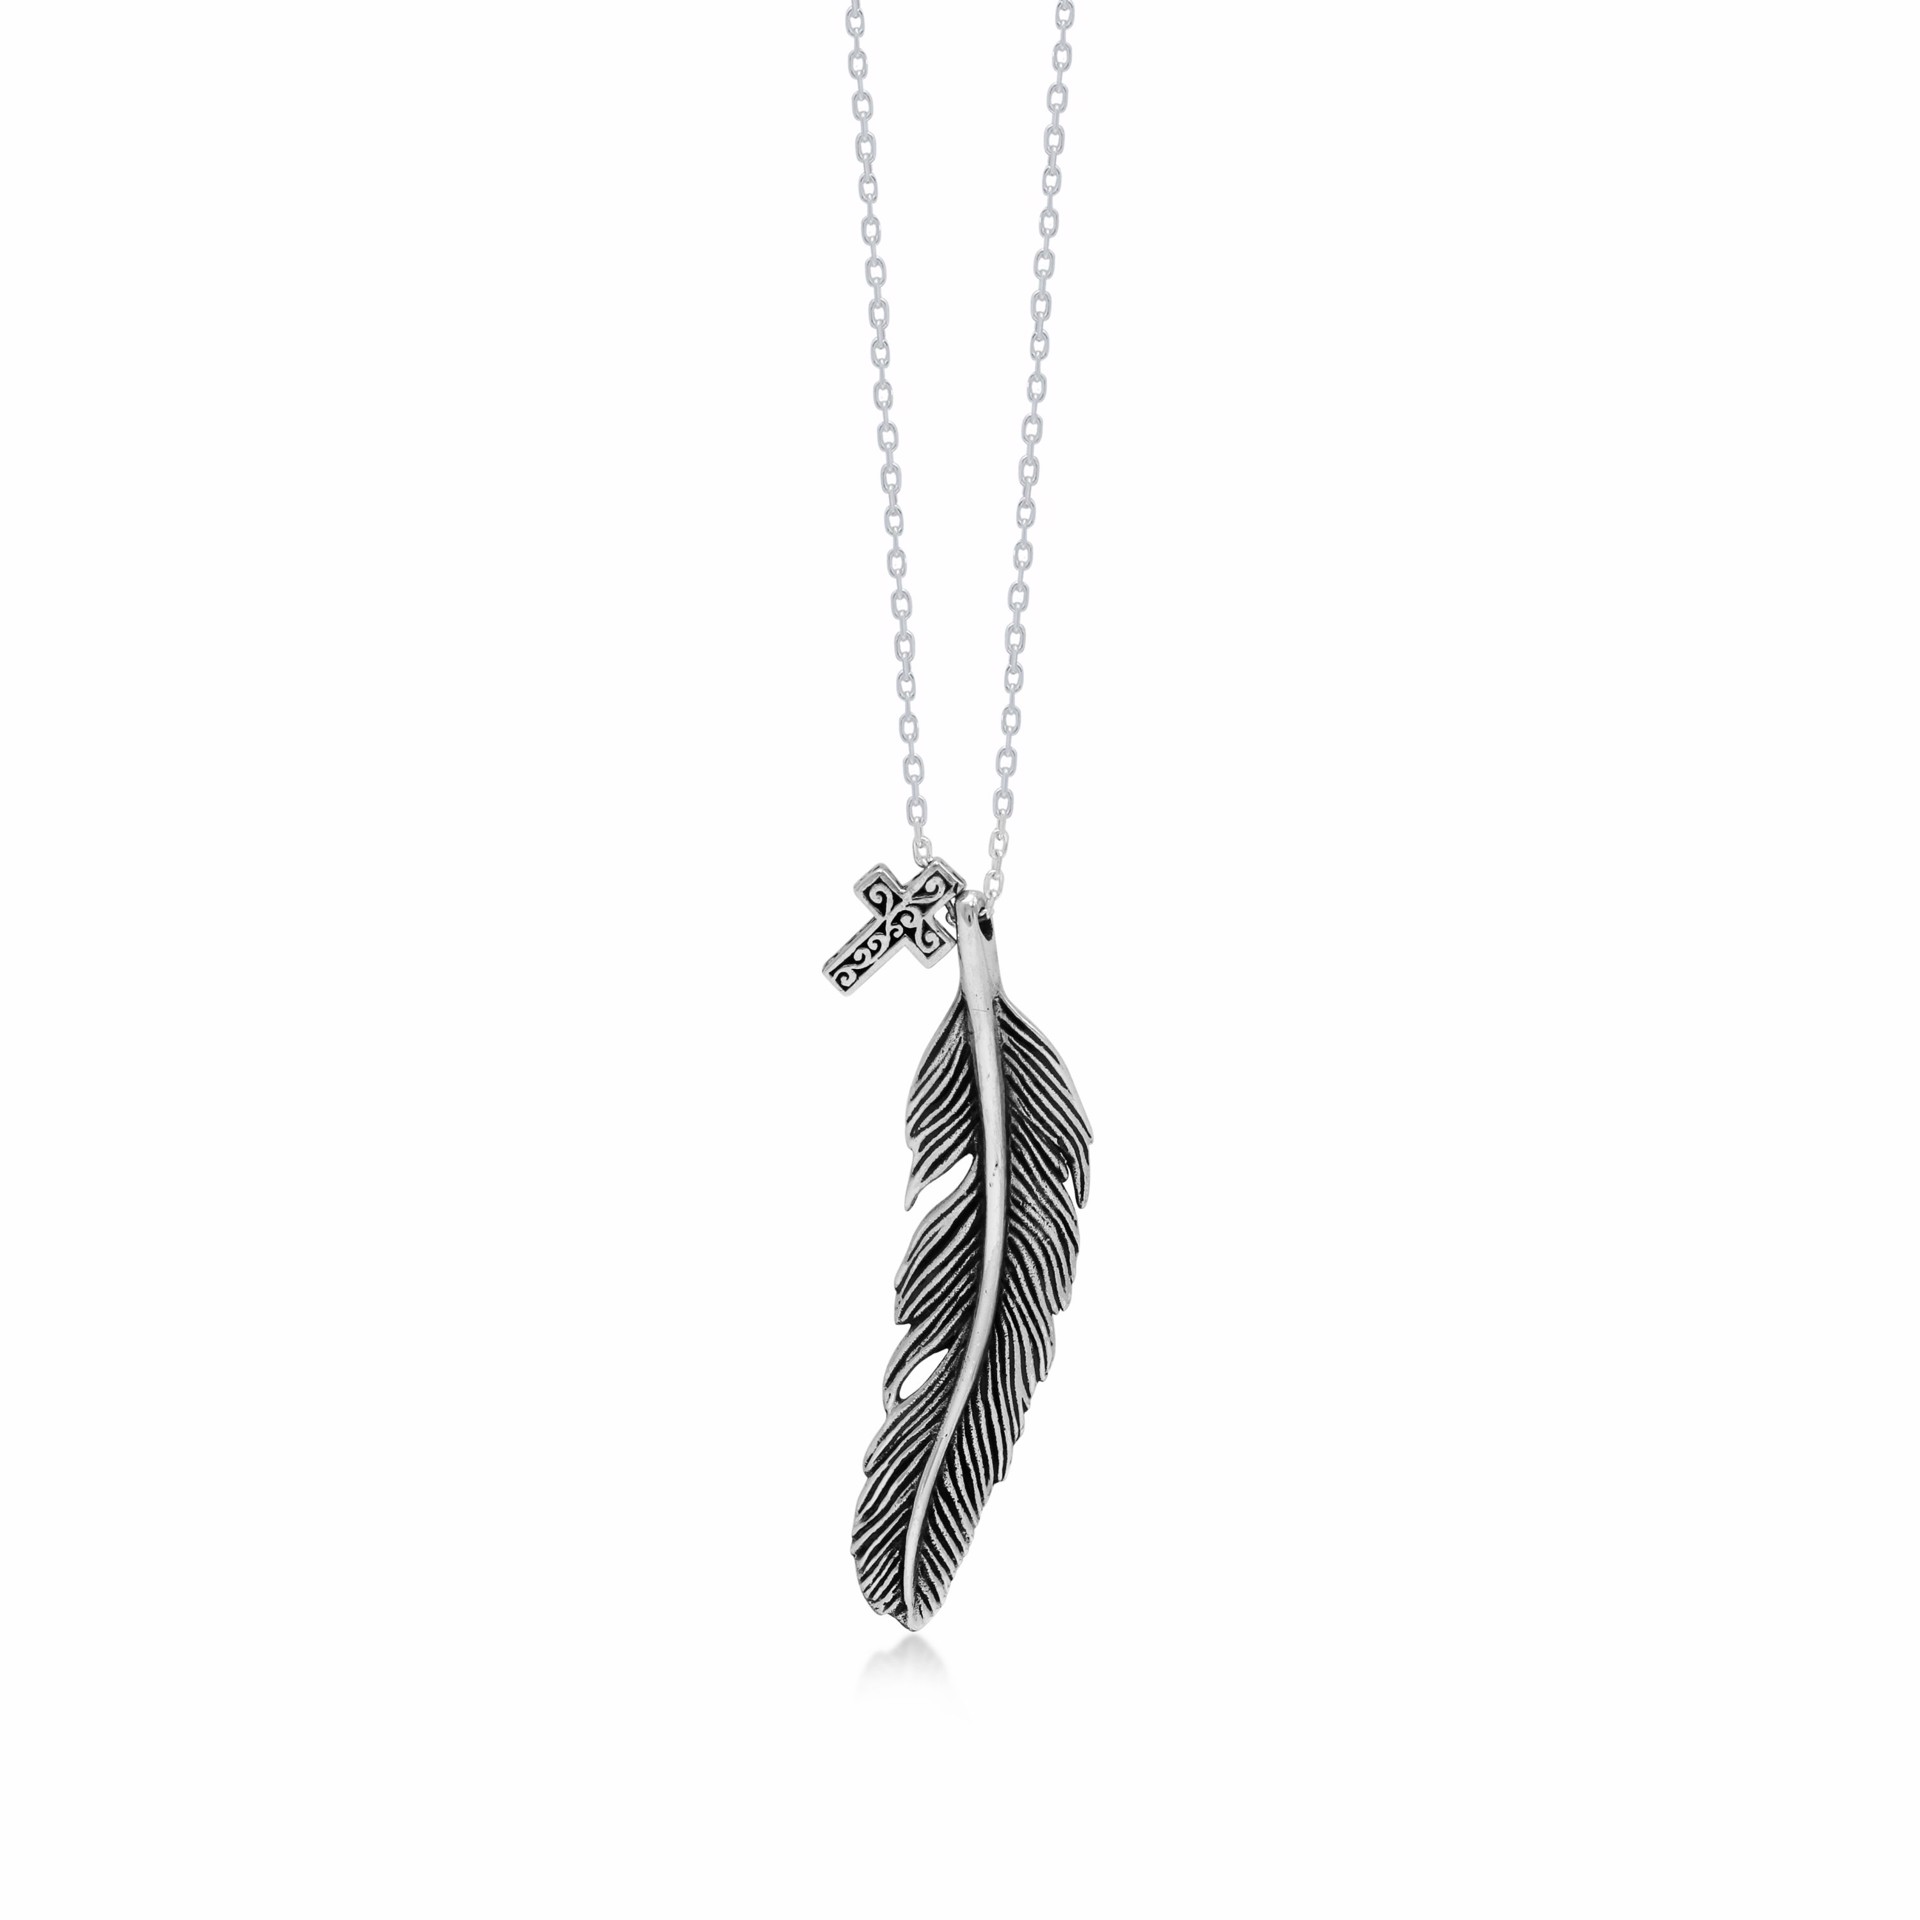 9731 Petite Cross with Feather Pendant Necklace by Lois Hill